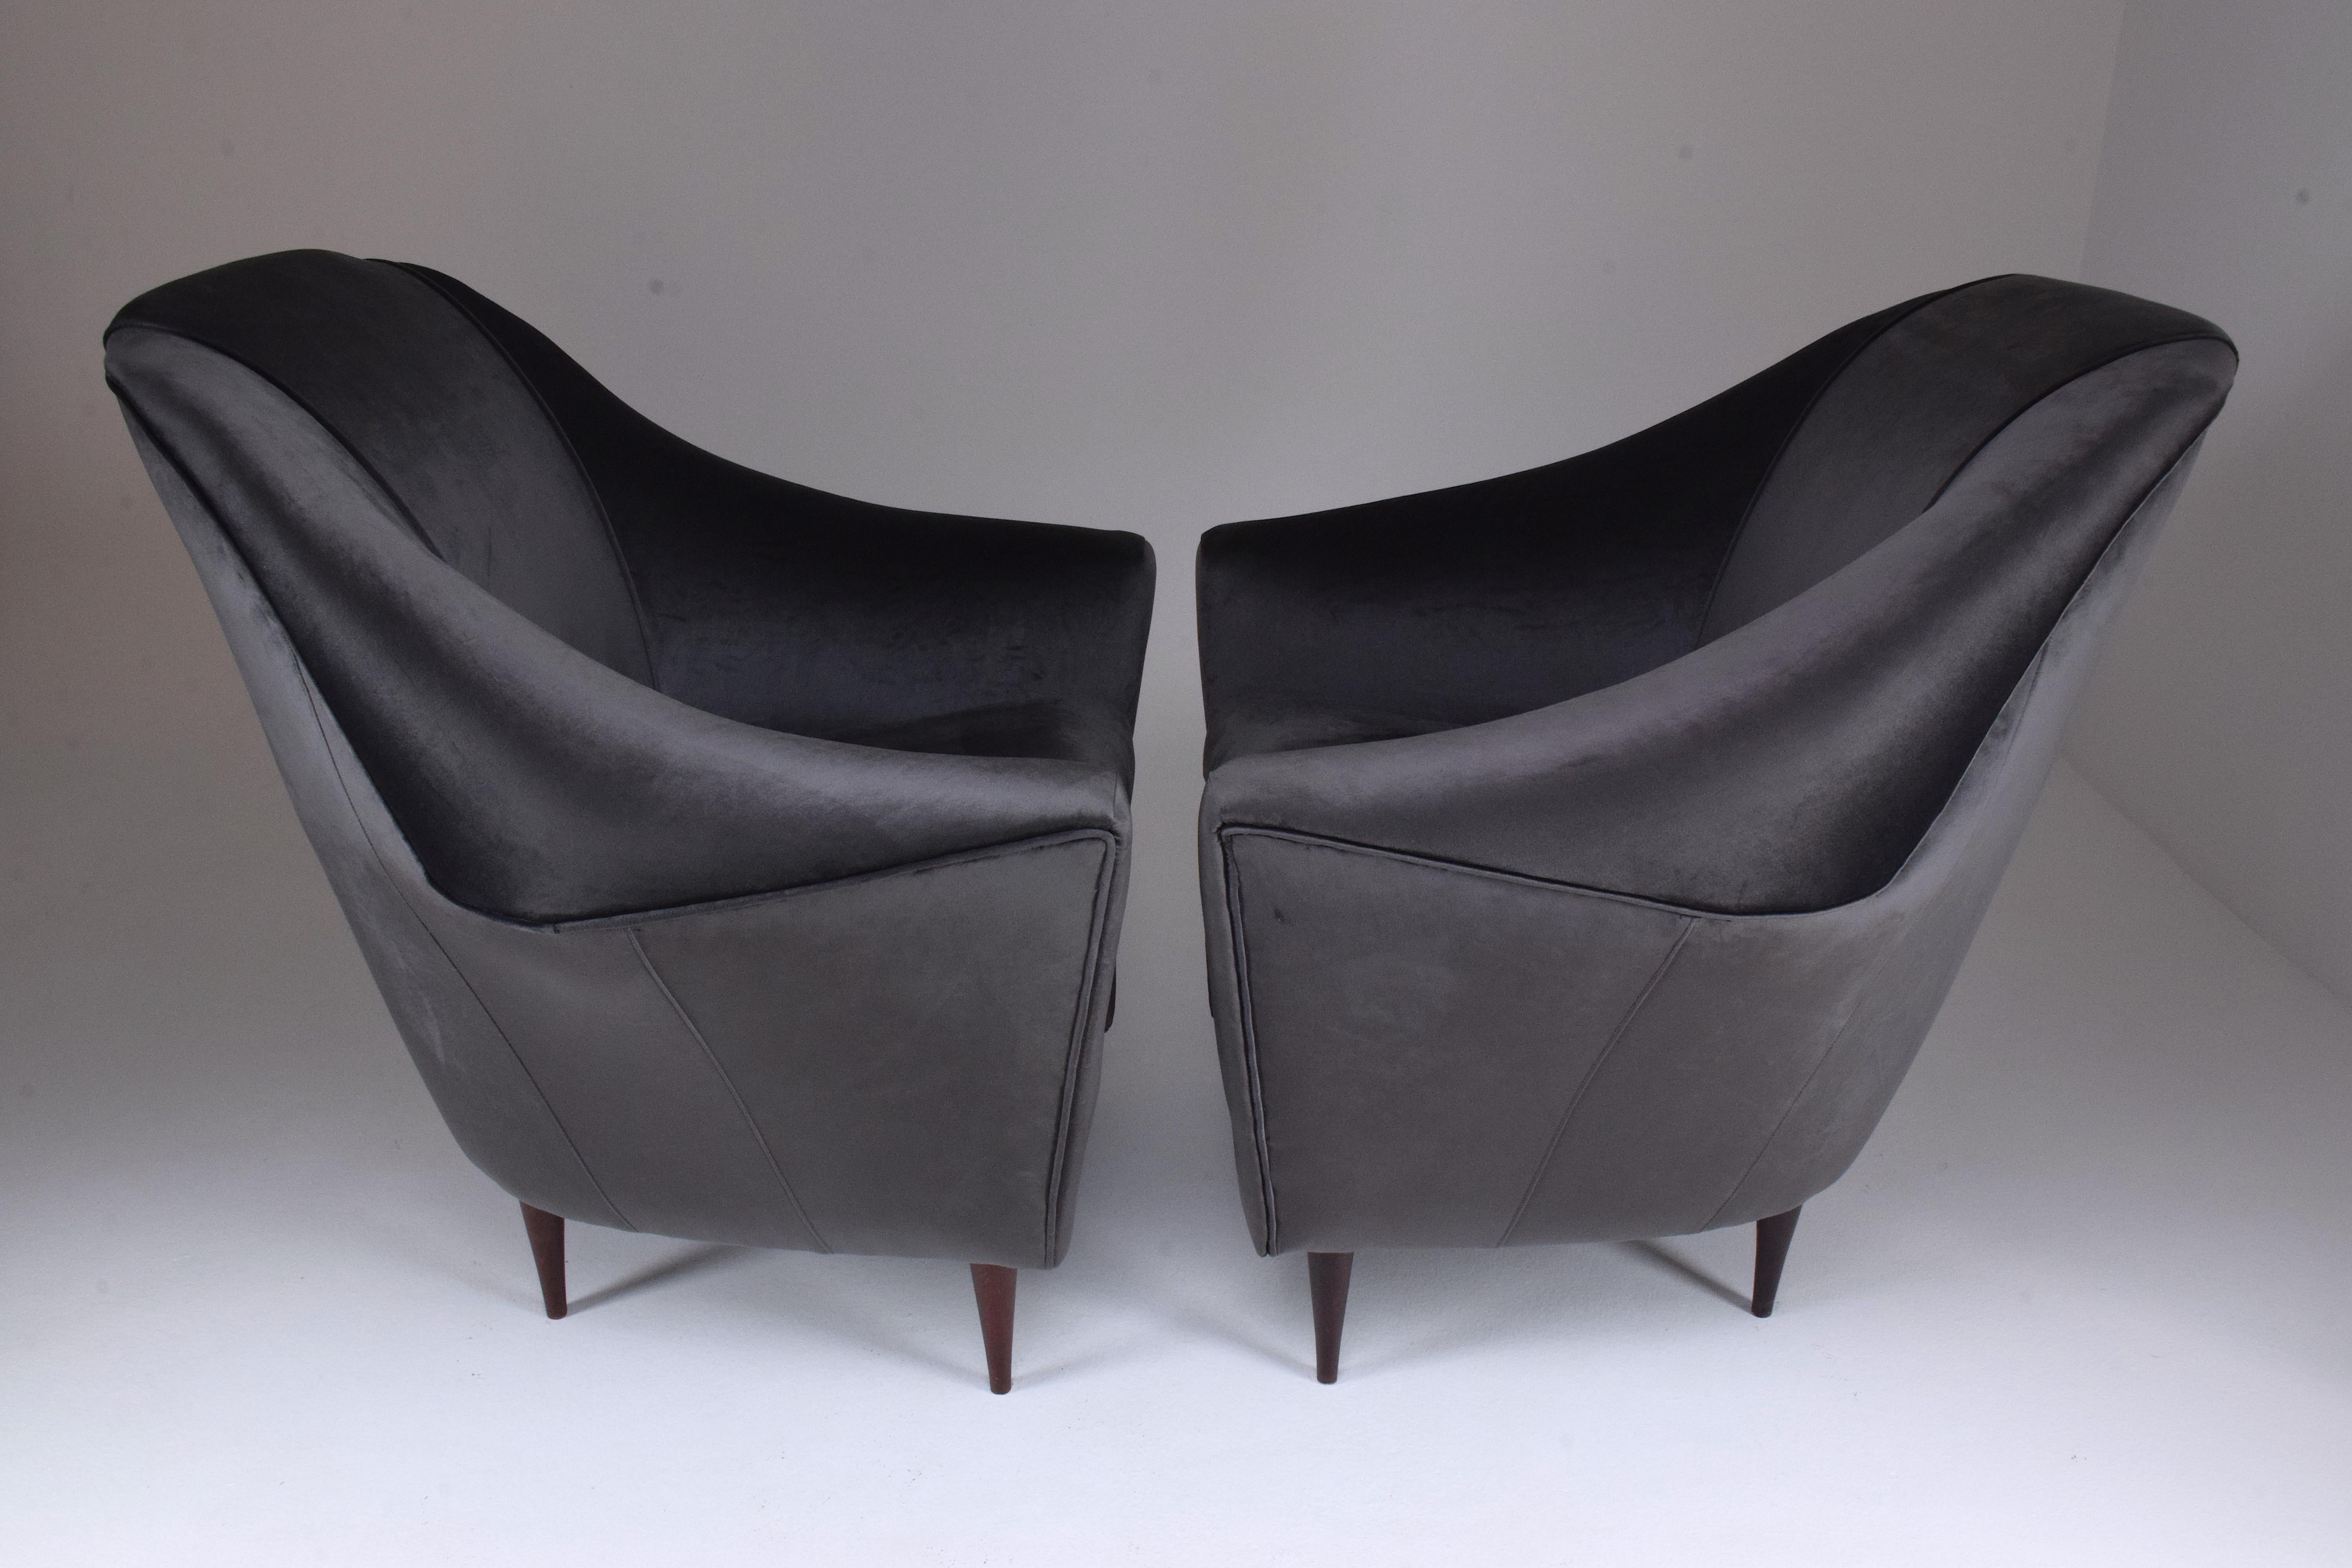 20th Century Ico Parisi Armchairs for Ariberto Colombo, Set of Two, 1950s For Sale 7